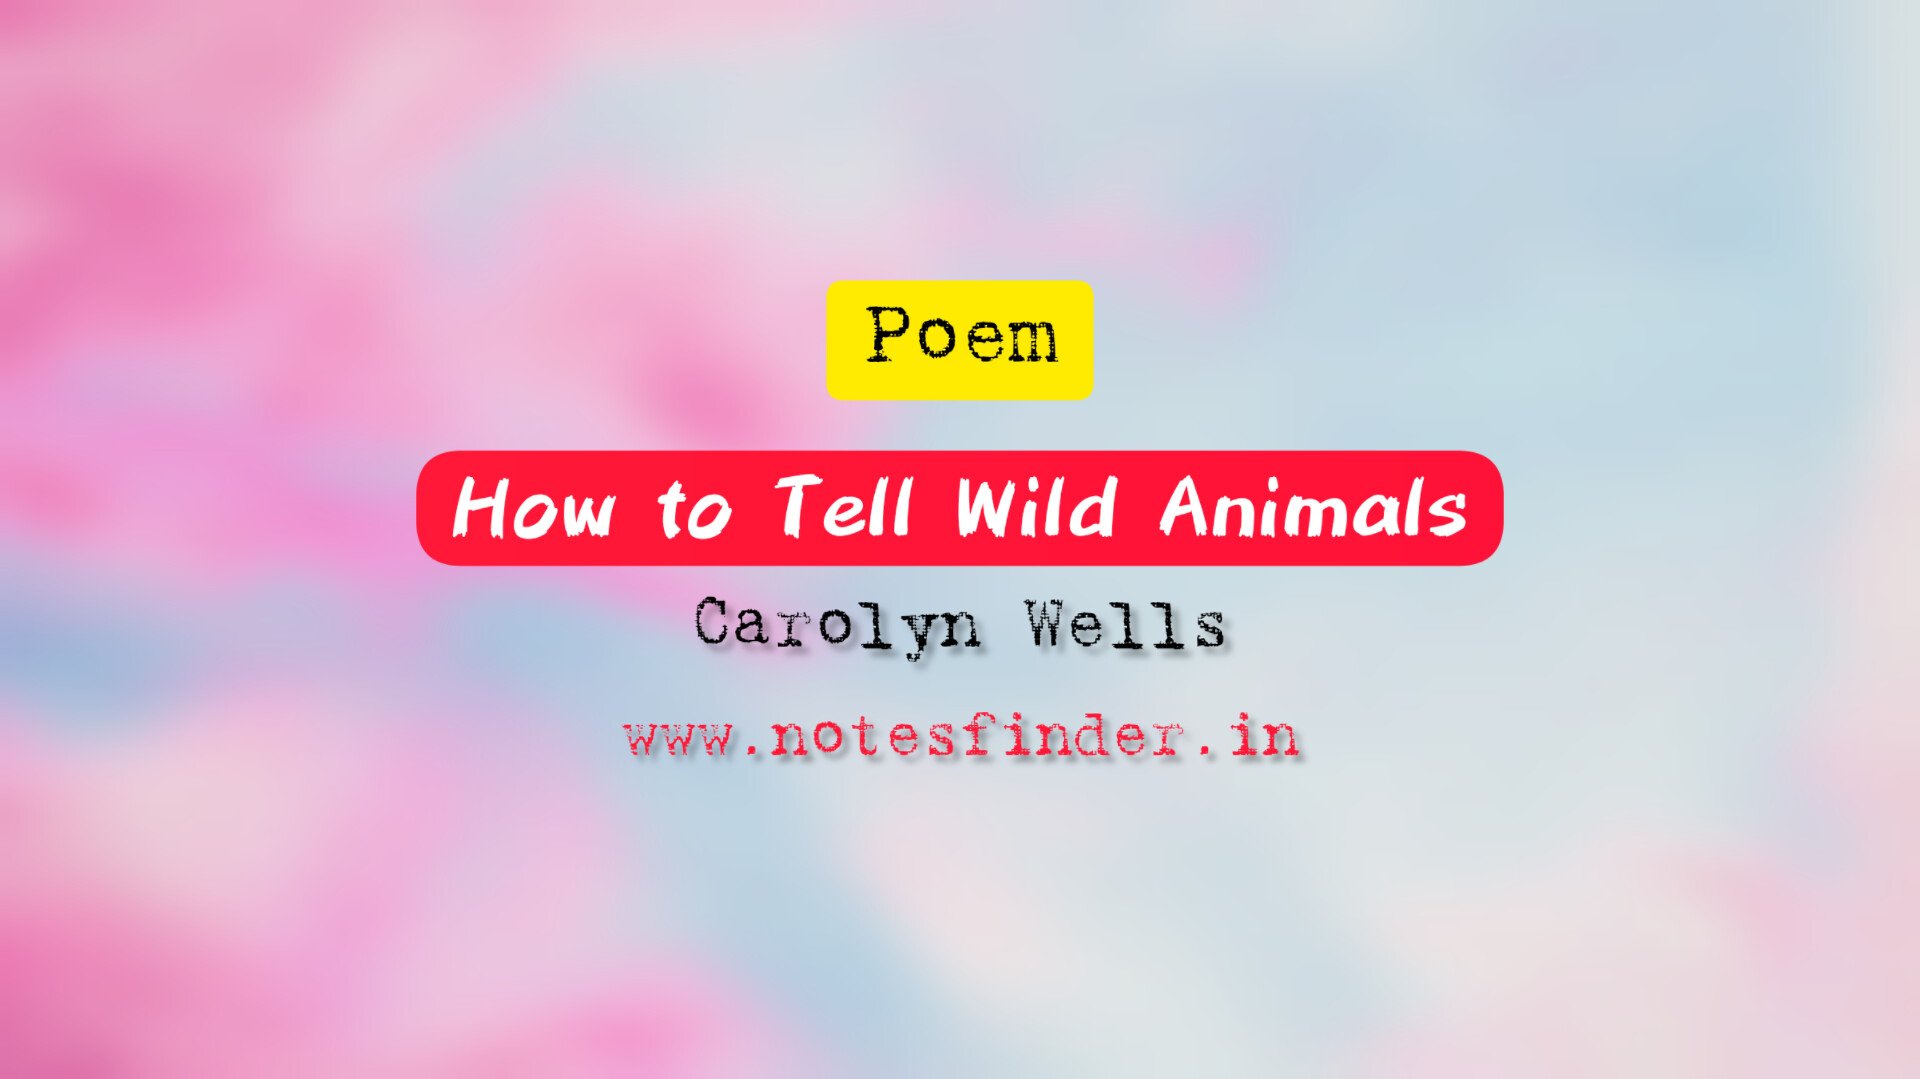 How to Tell Wild Animals(Poem)- Carolyn Wells - NotesFinder